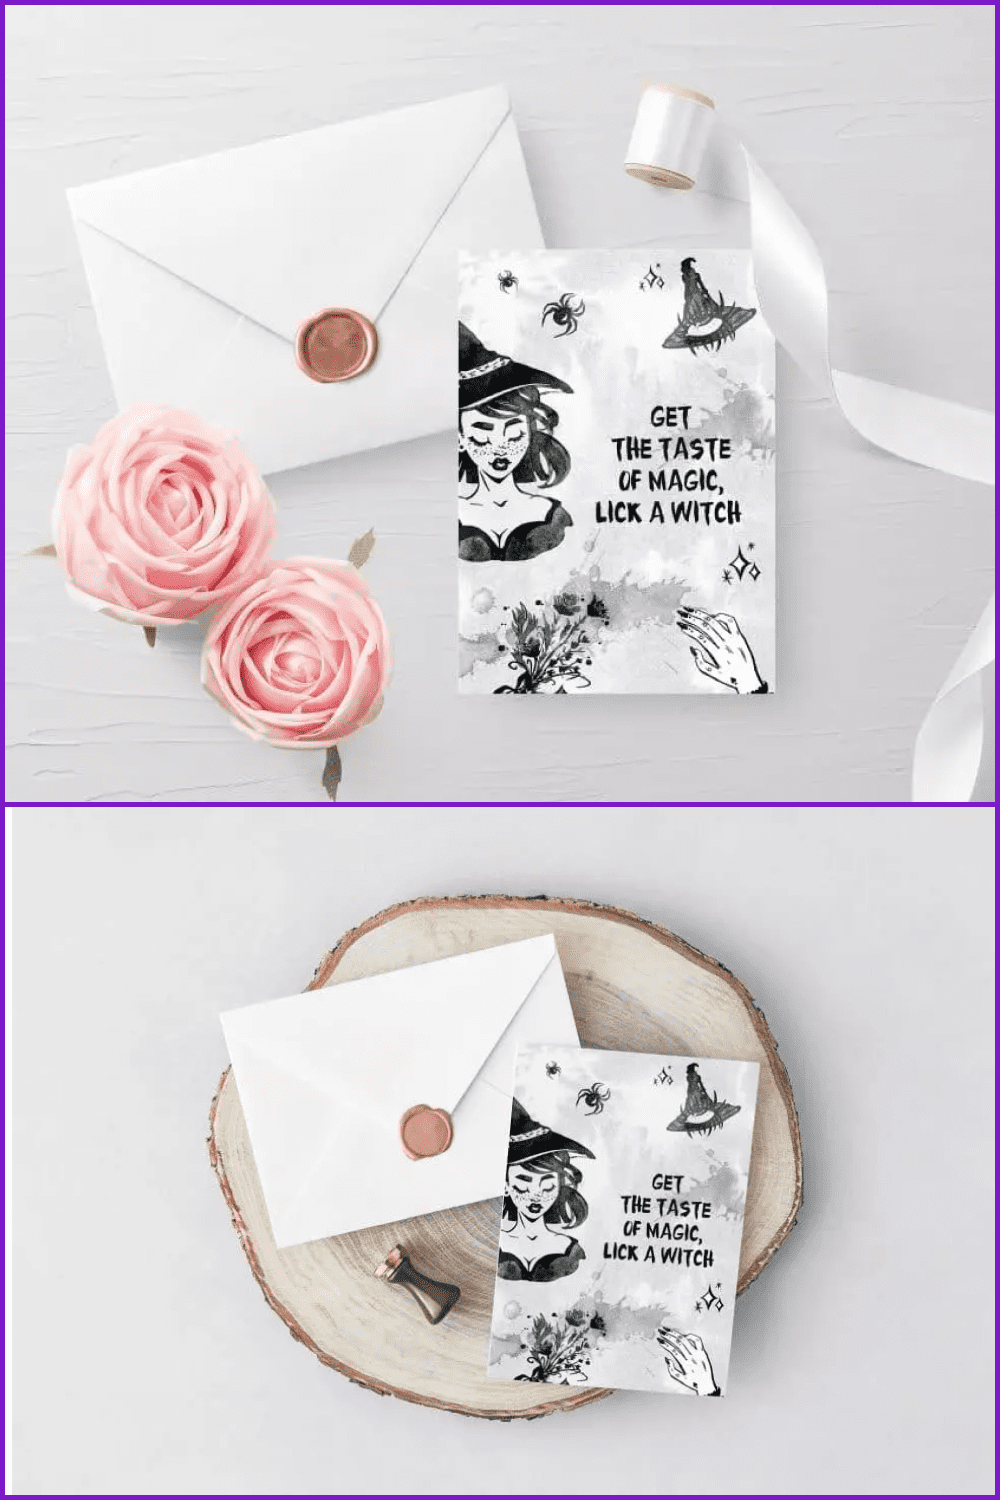 Vintage black and white Halloween card with a witch on the background of an envelope and roses.